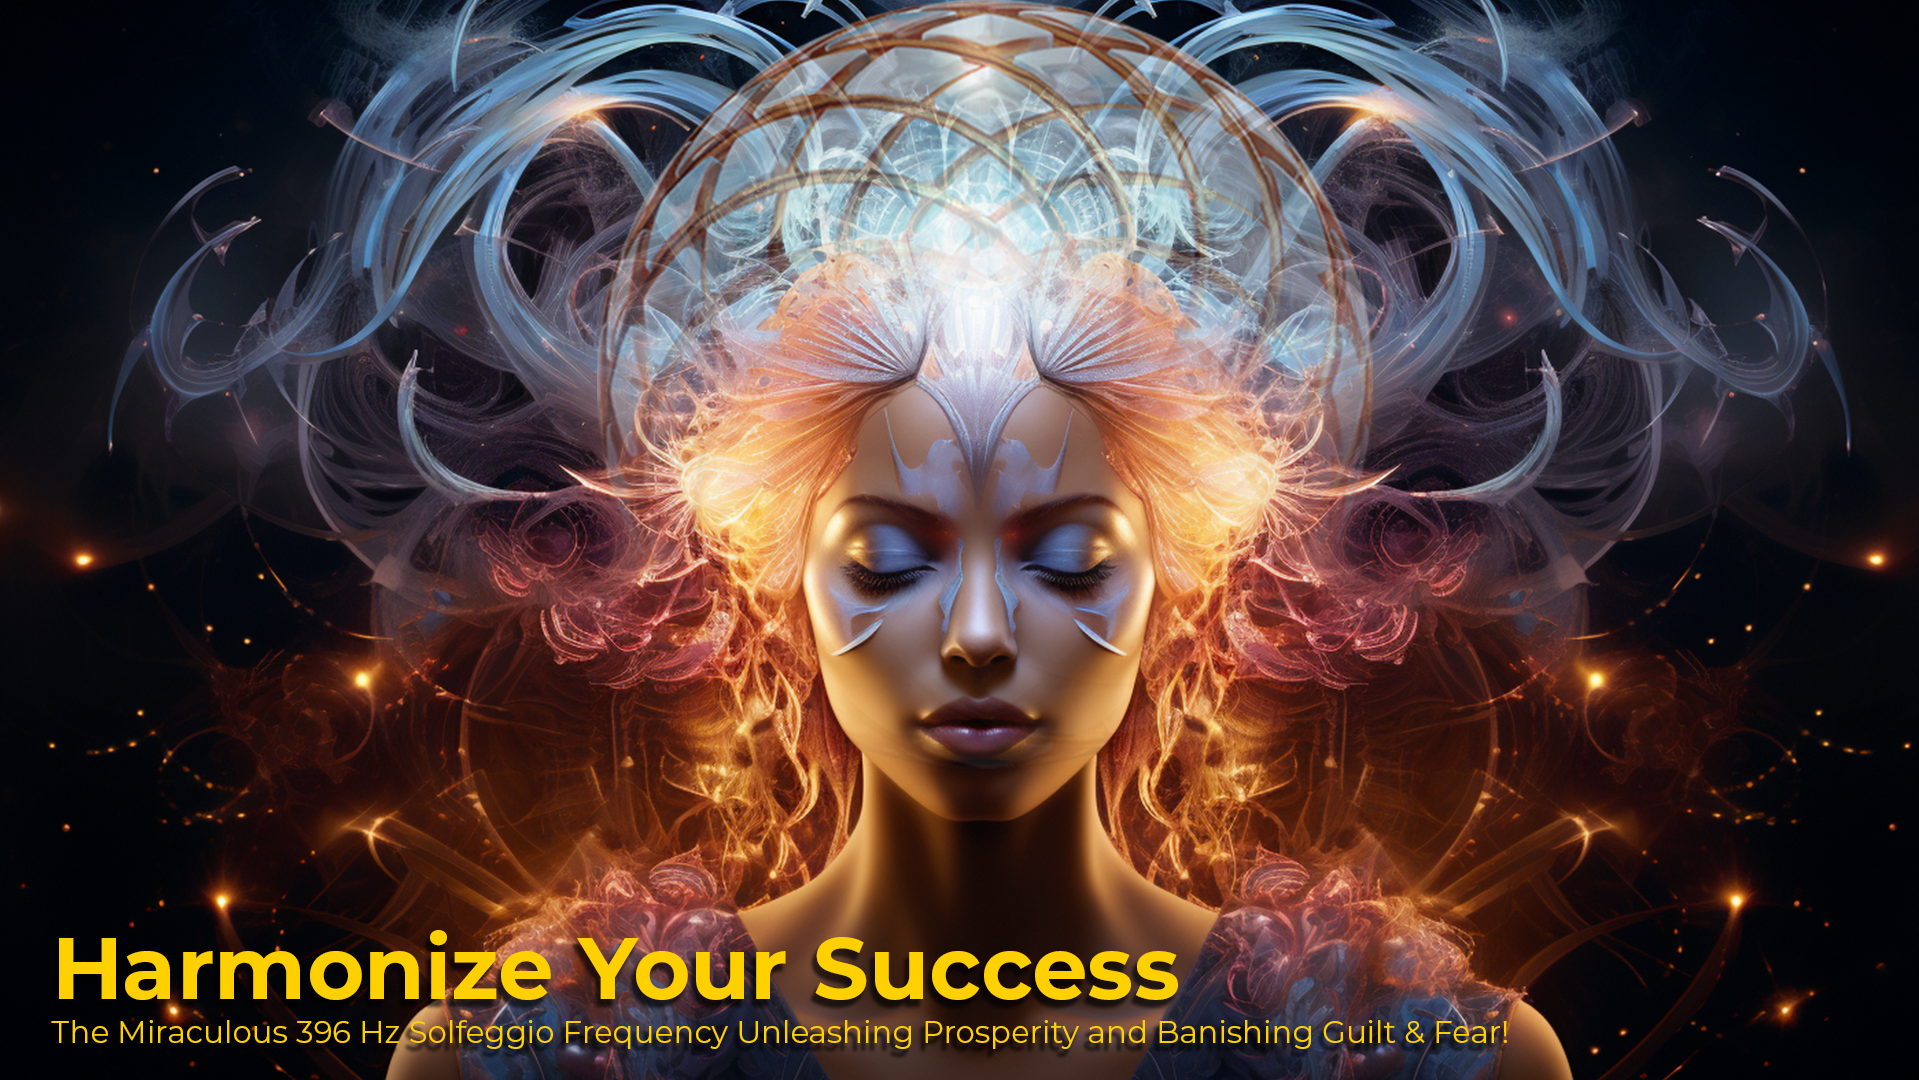 Harmonize Your Success: The Miraculous 396 Hz Solfeggio Frequency Unleashing Prosperity and Banishing Guilt & Fear